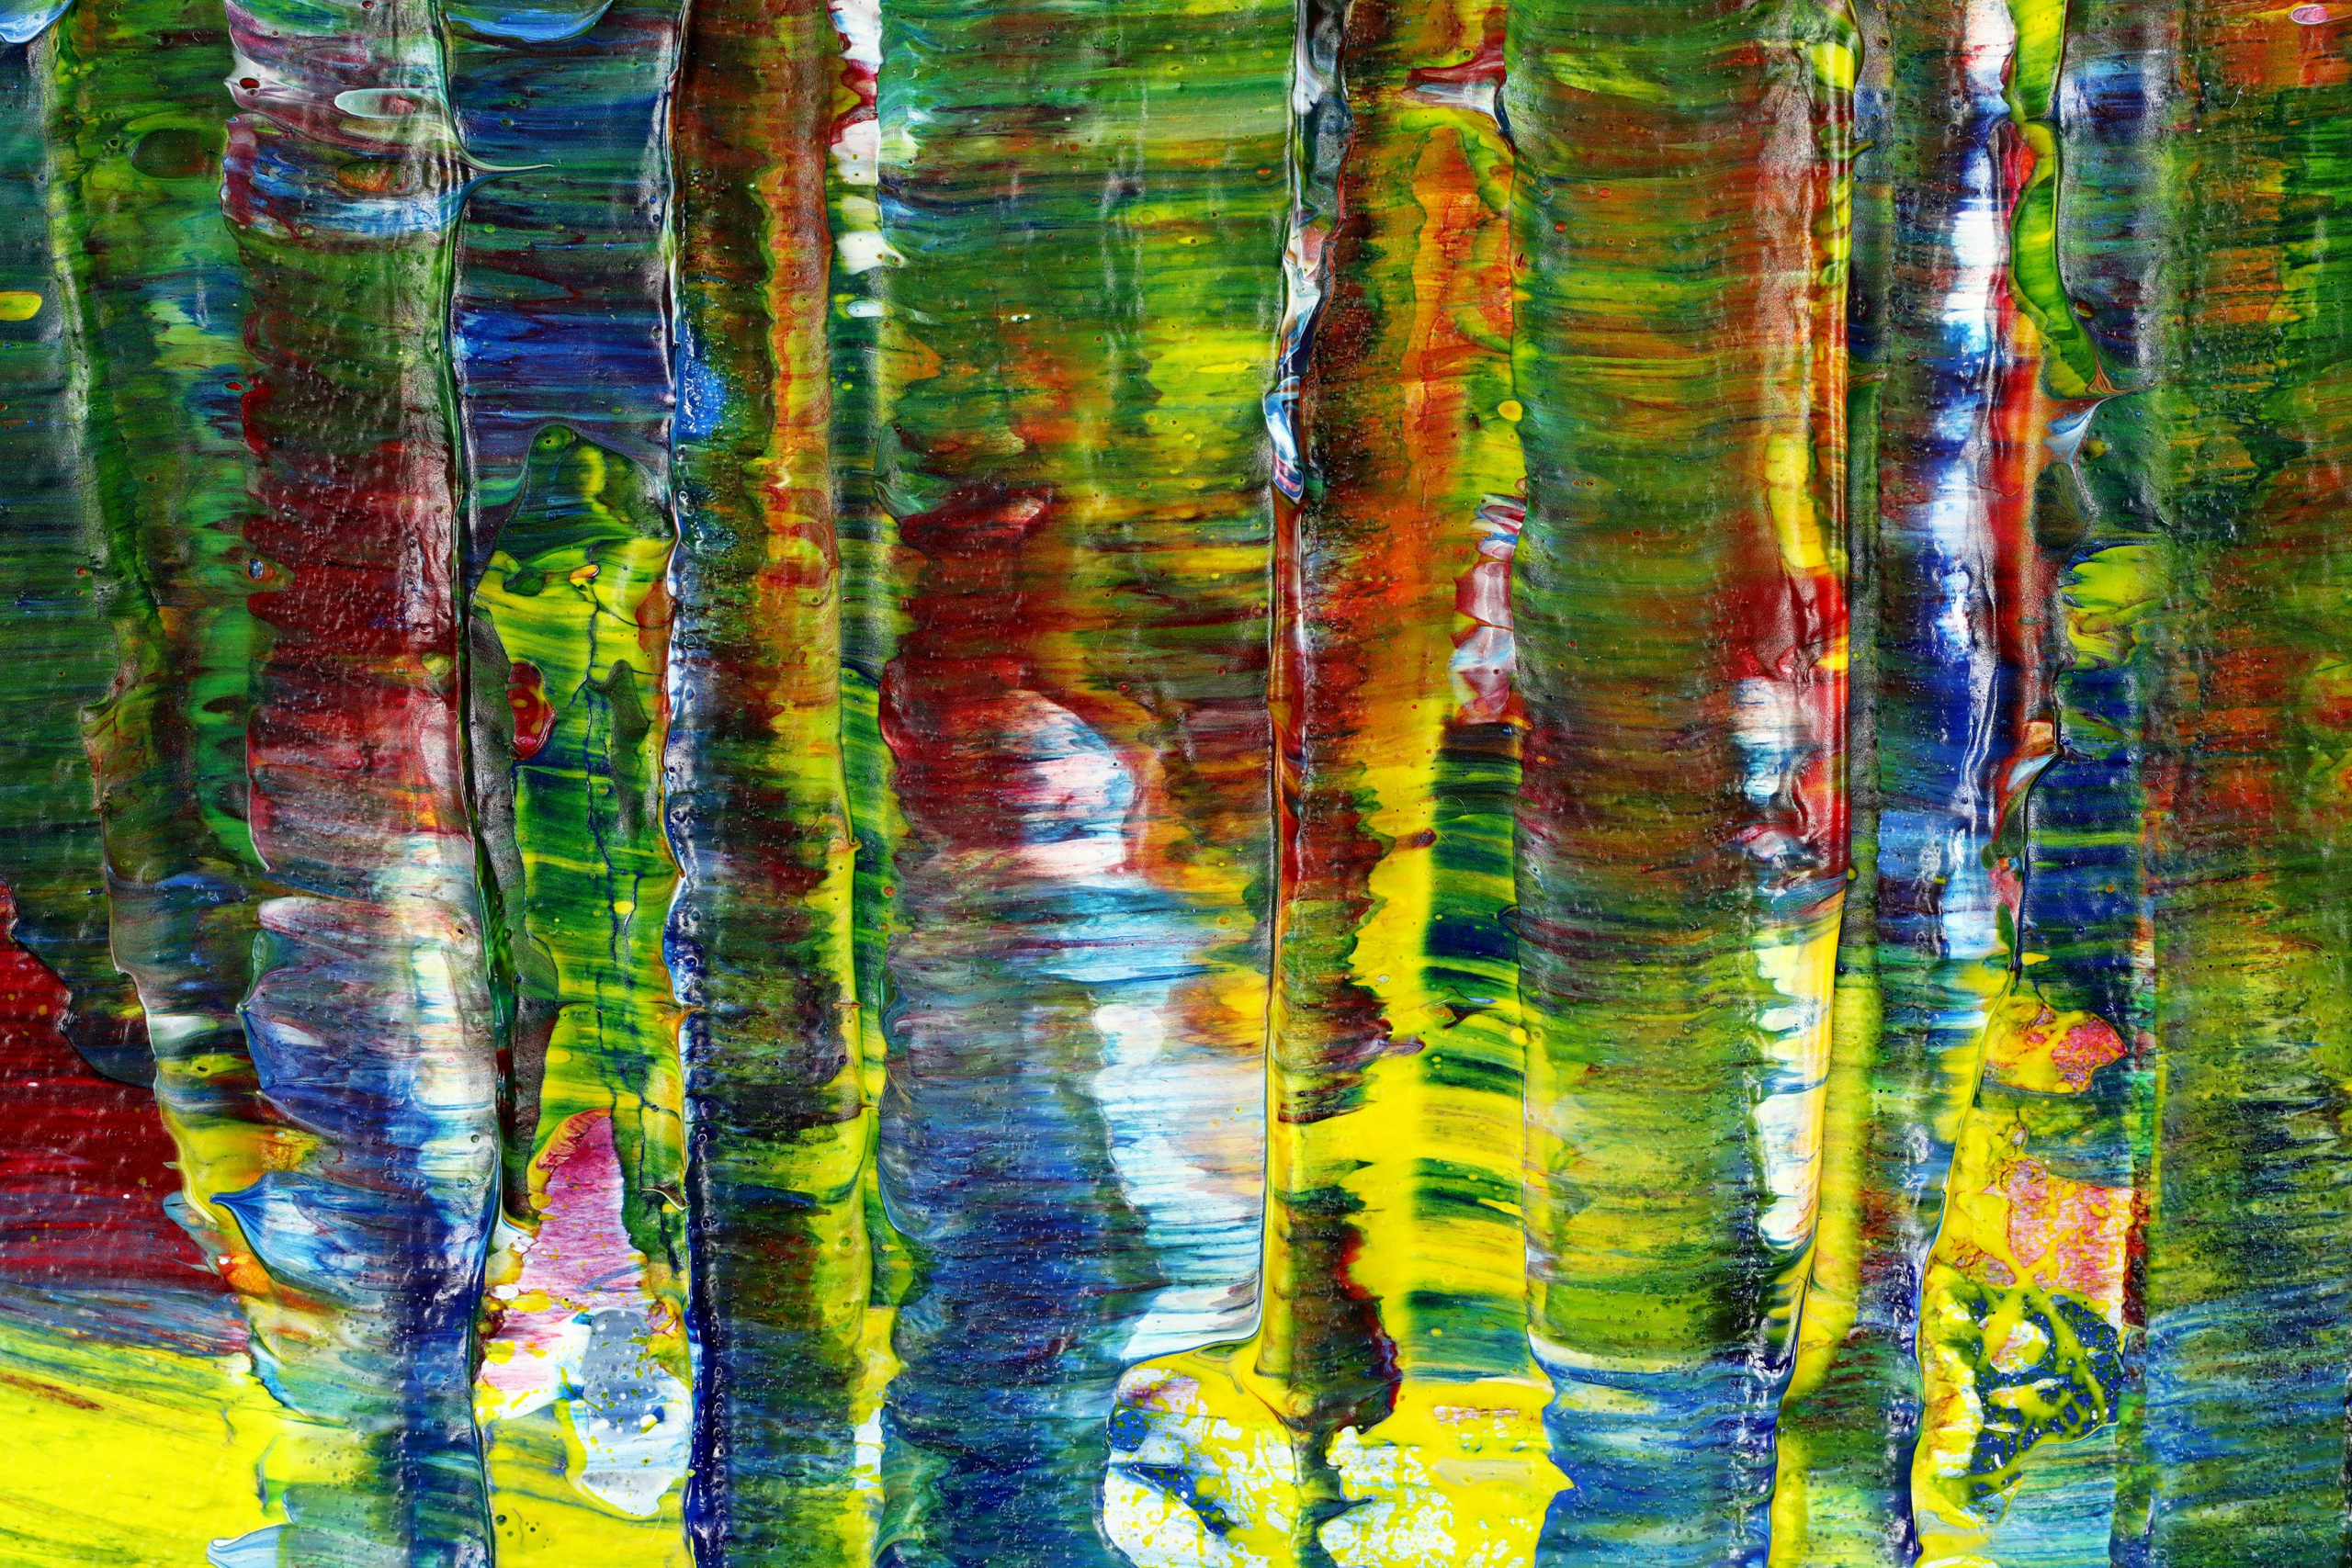 Water and Forest (2021) / 16x20 inches / Nestor Toro